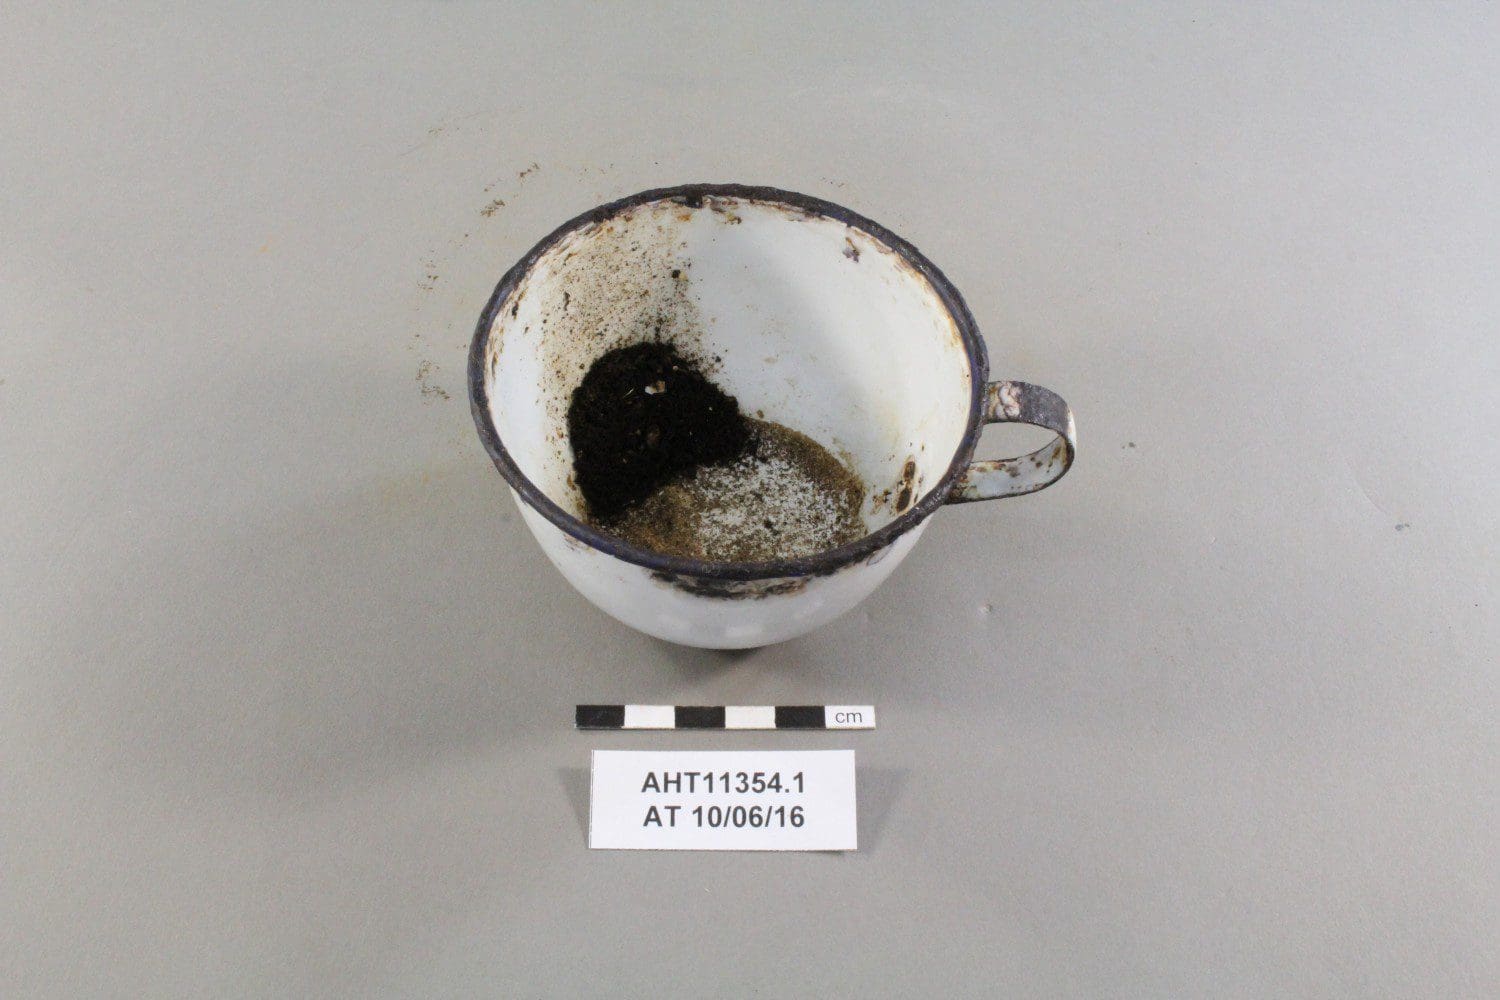 The enamelled mug after conservation with the remains of the last cup of tea still visible in the mug.